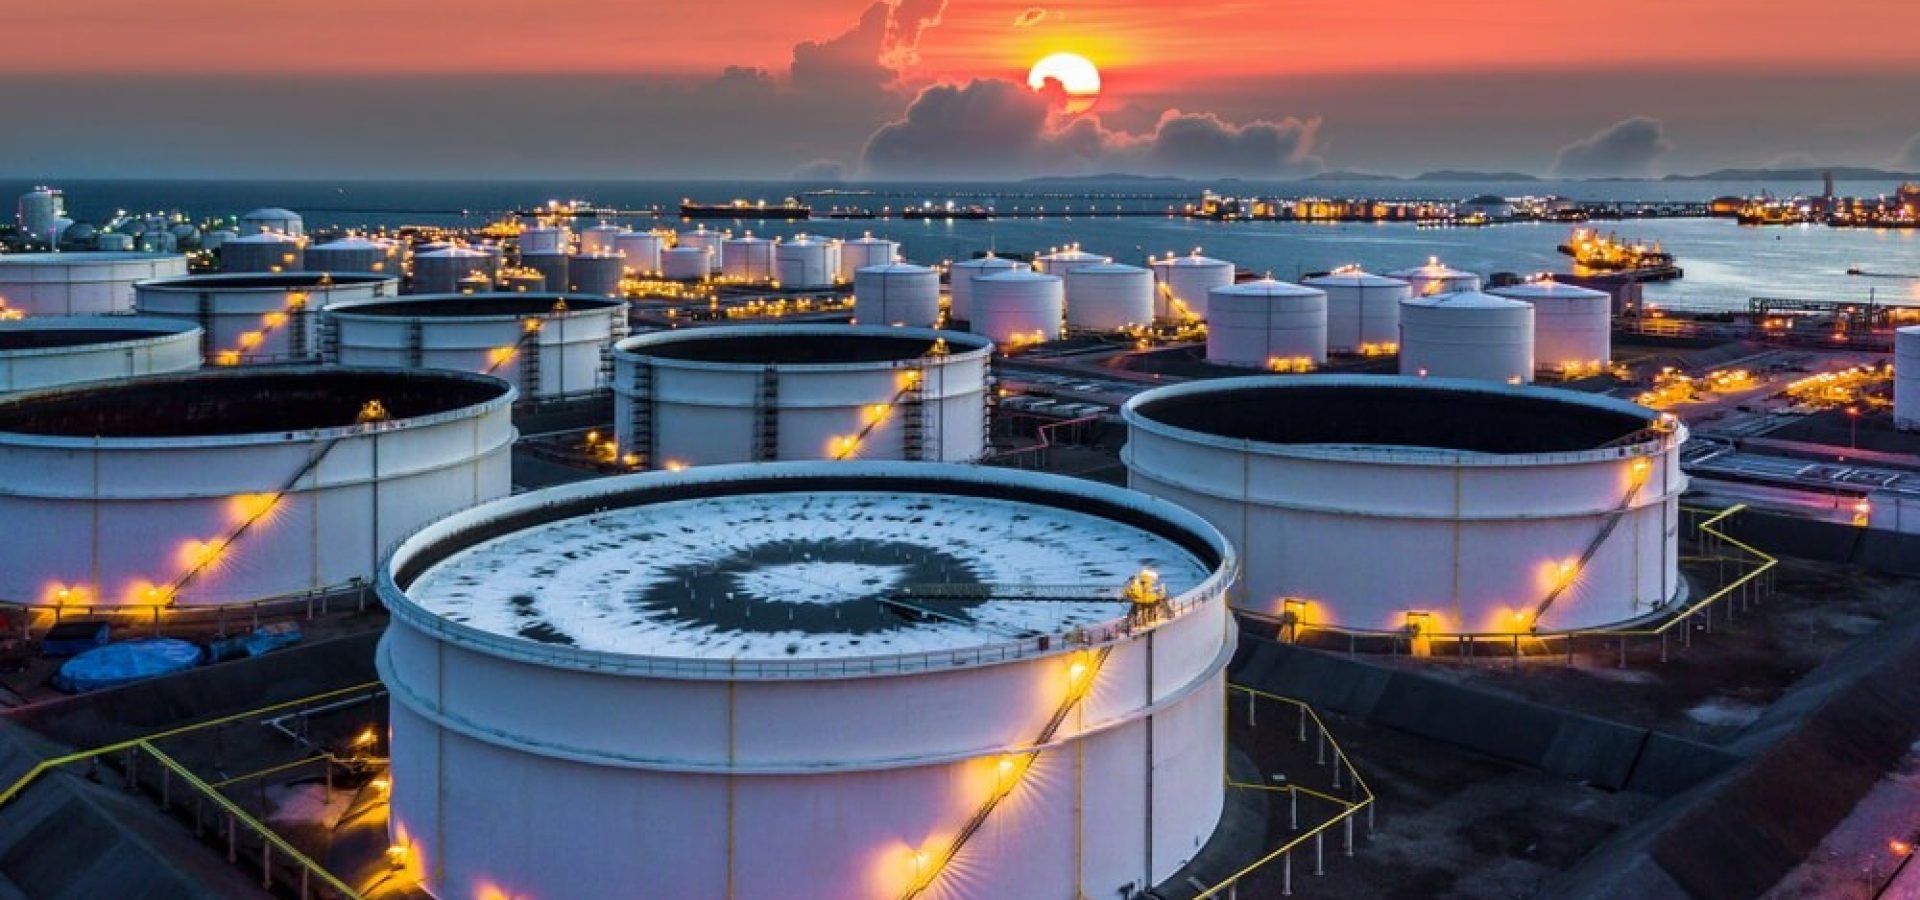 Petroleum Products: Natural gas tank in the petrochemical industry